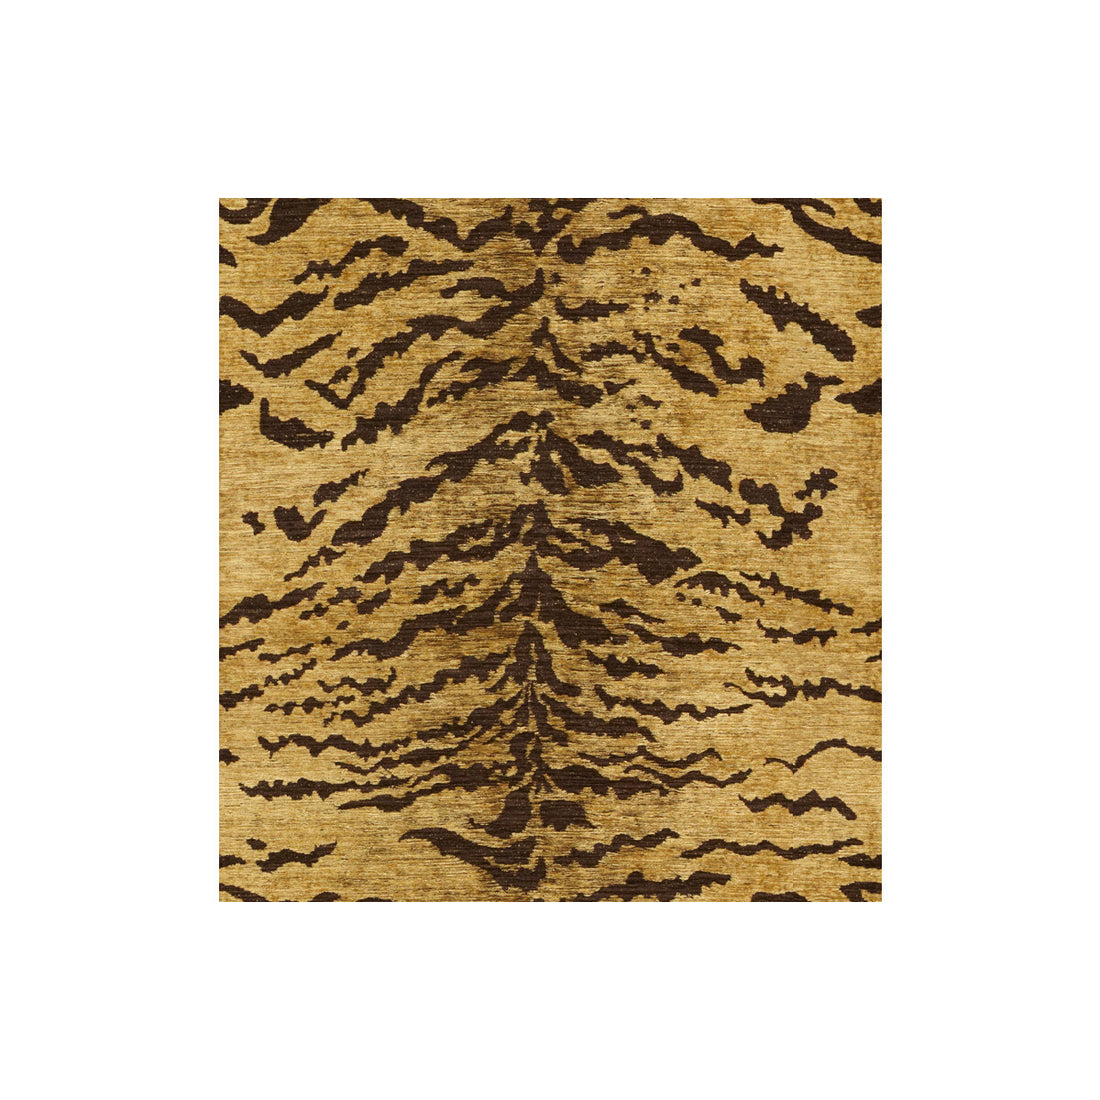 On The Hunt fabric in tigers eye color - pattern 32760.640.0 - by Kravet Couture